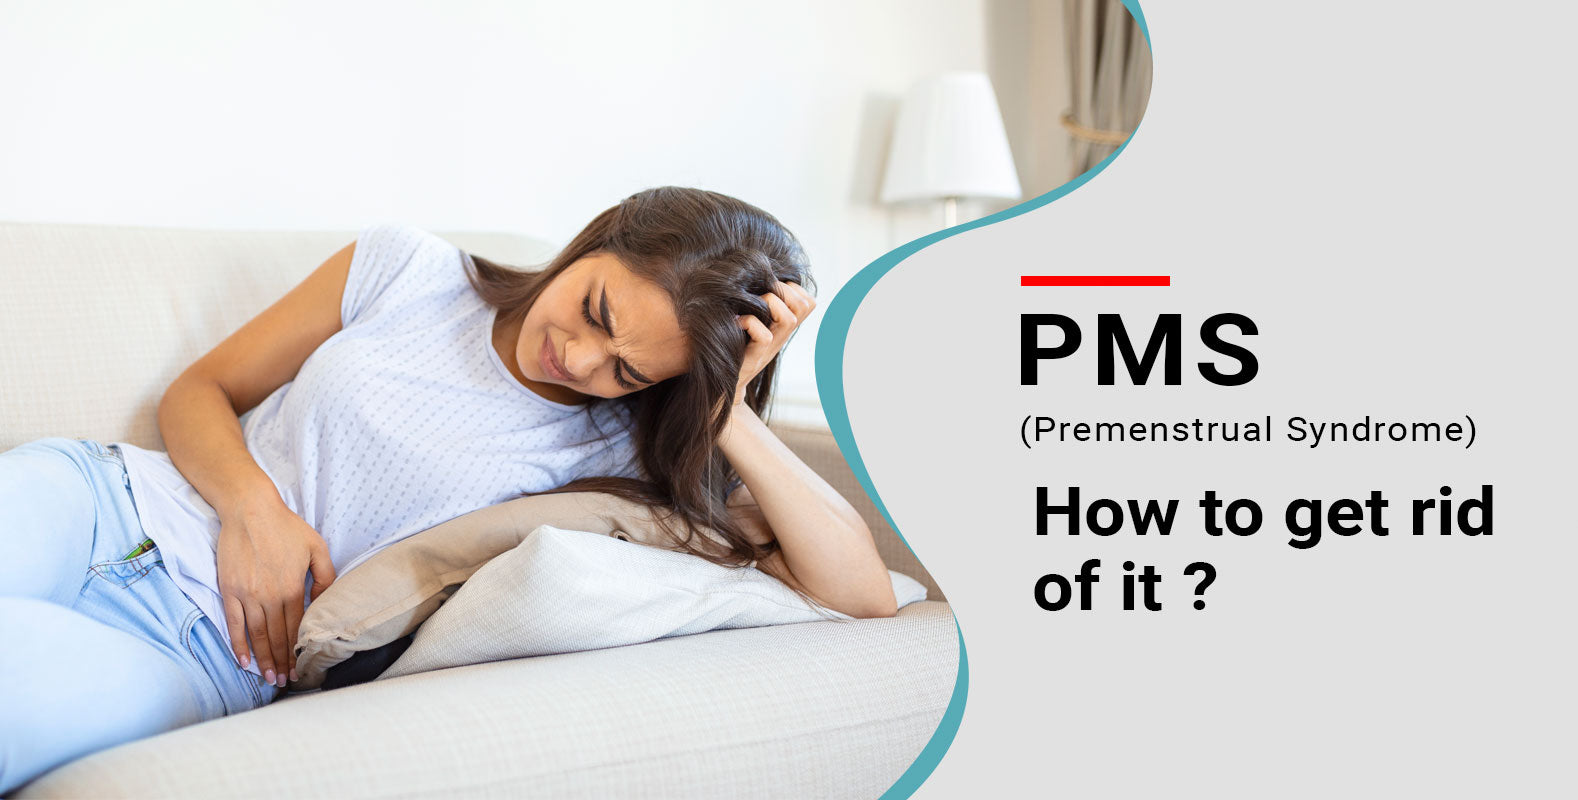 What is PMS ?